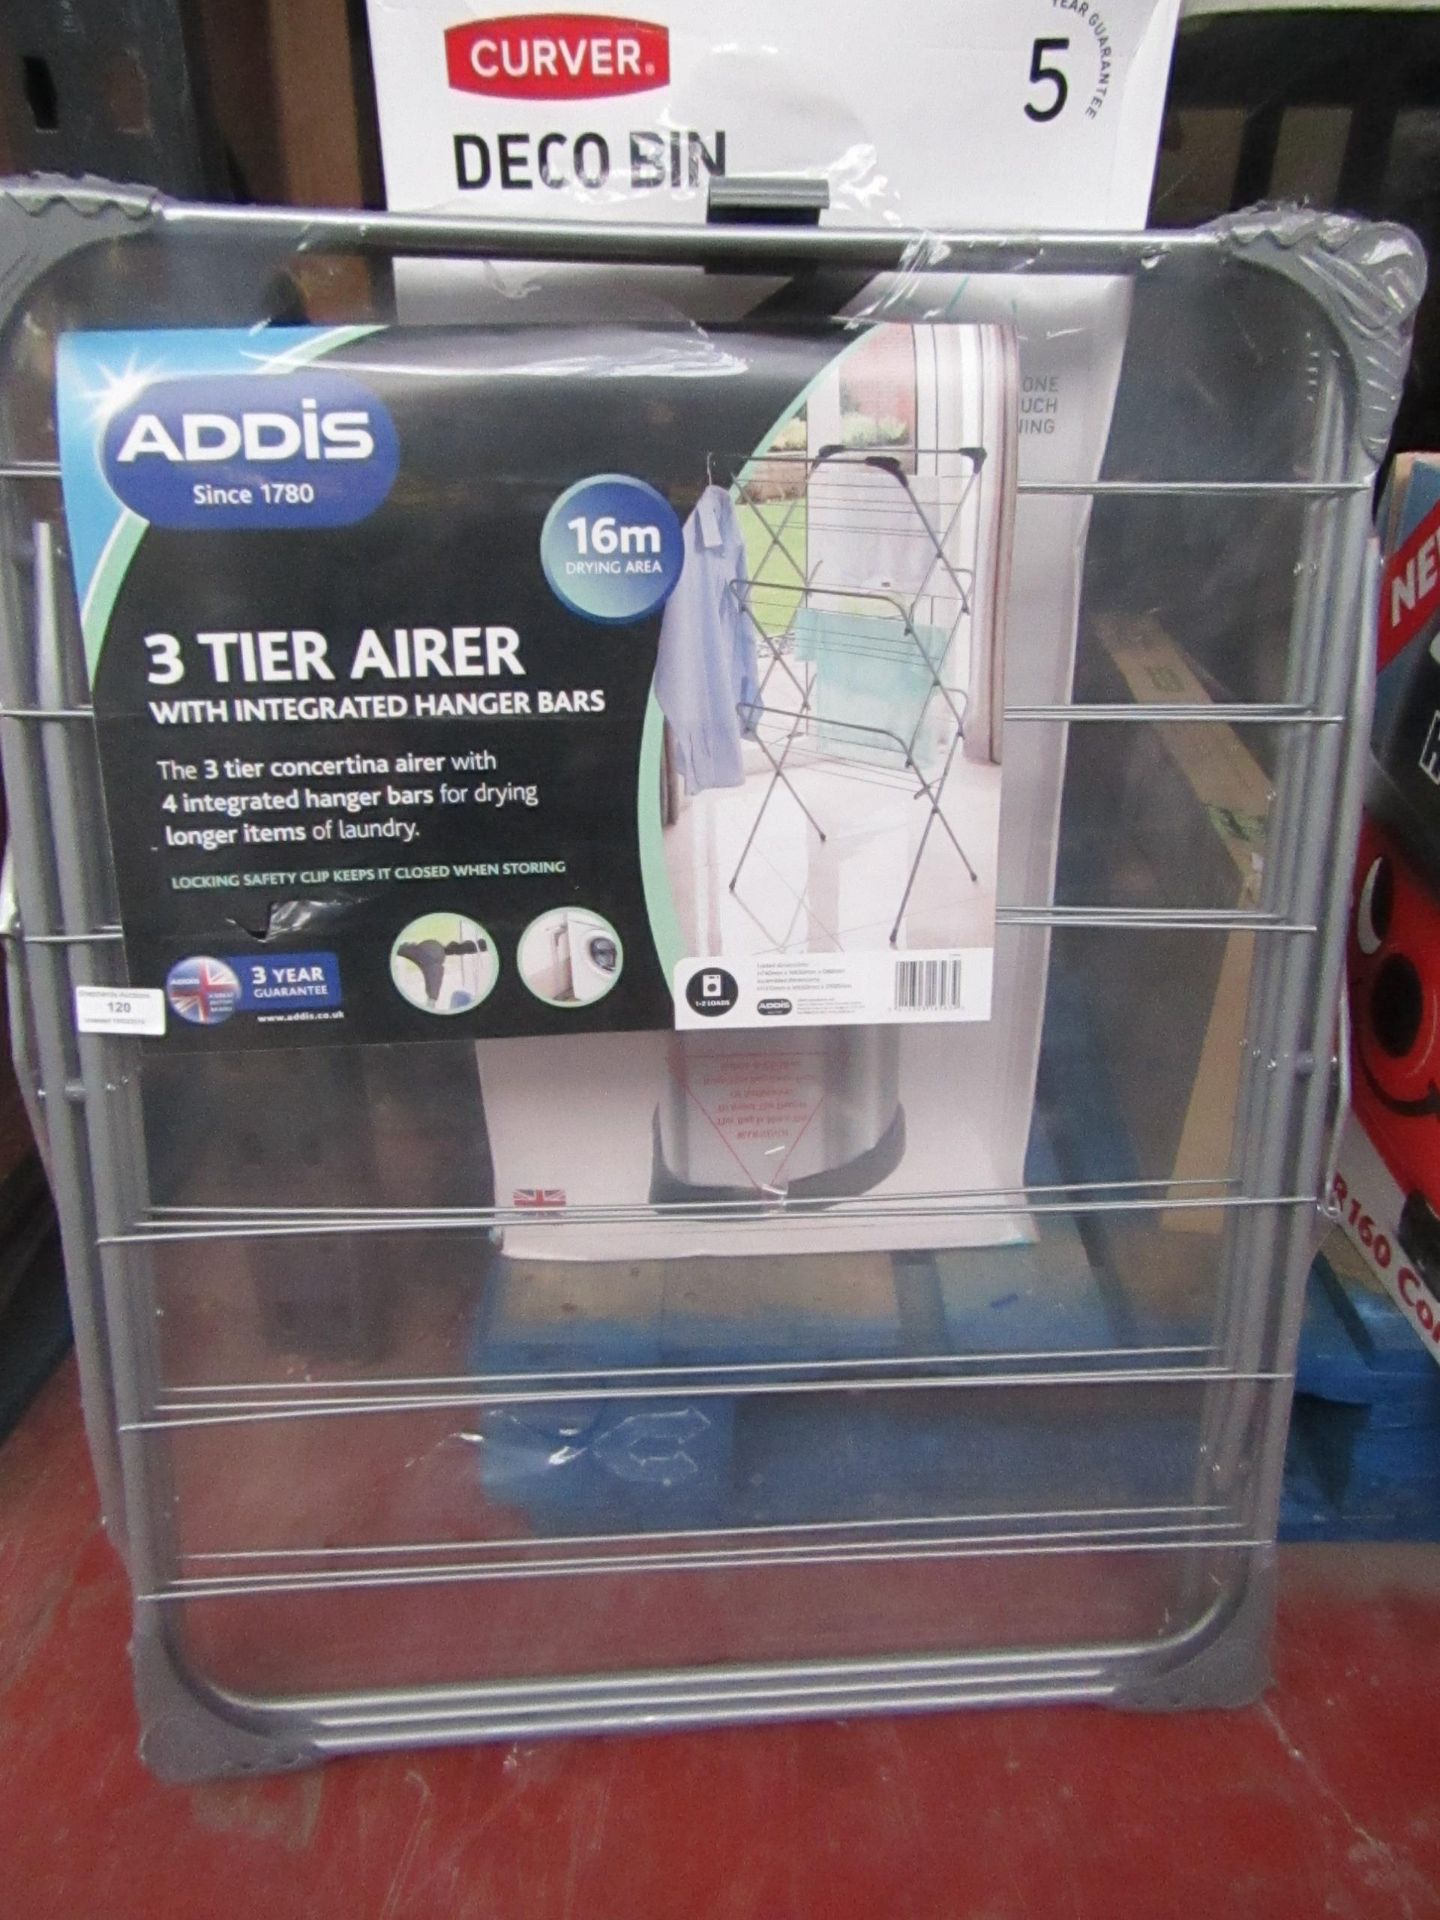 Addis 3 tier airer with intergrated hanger bars, packaged.